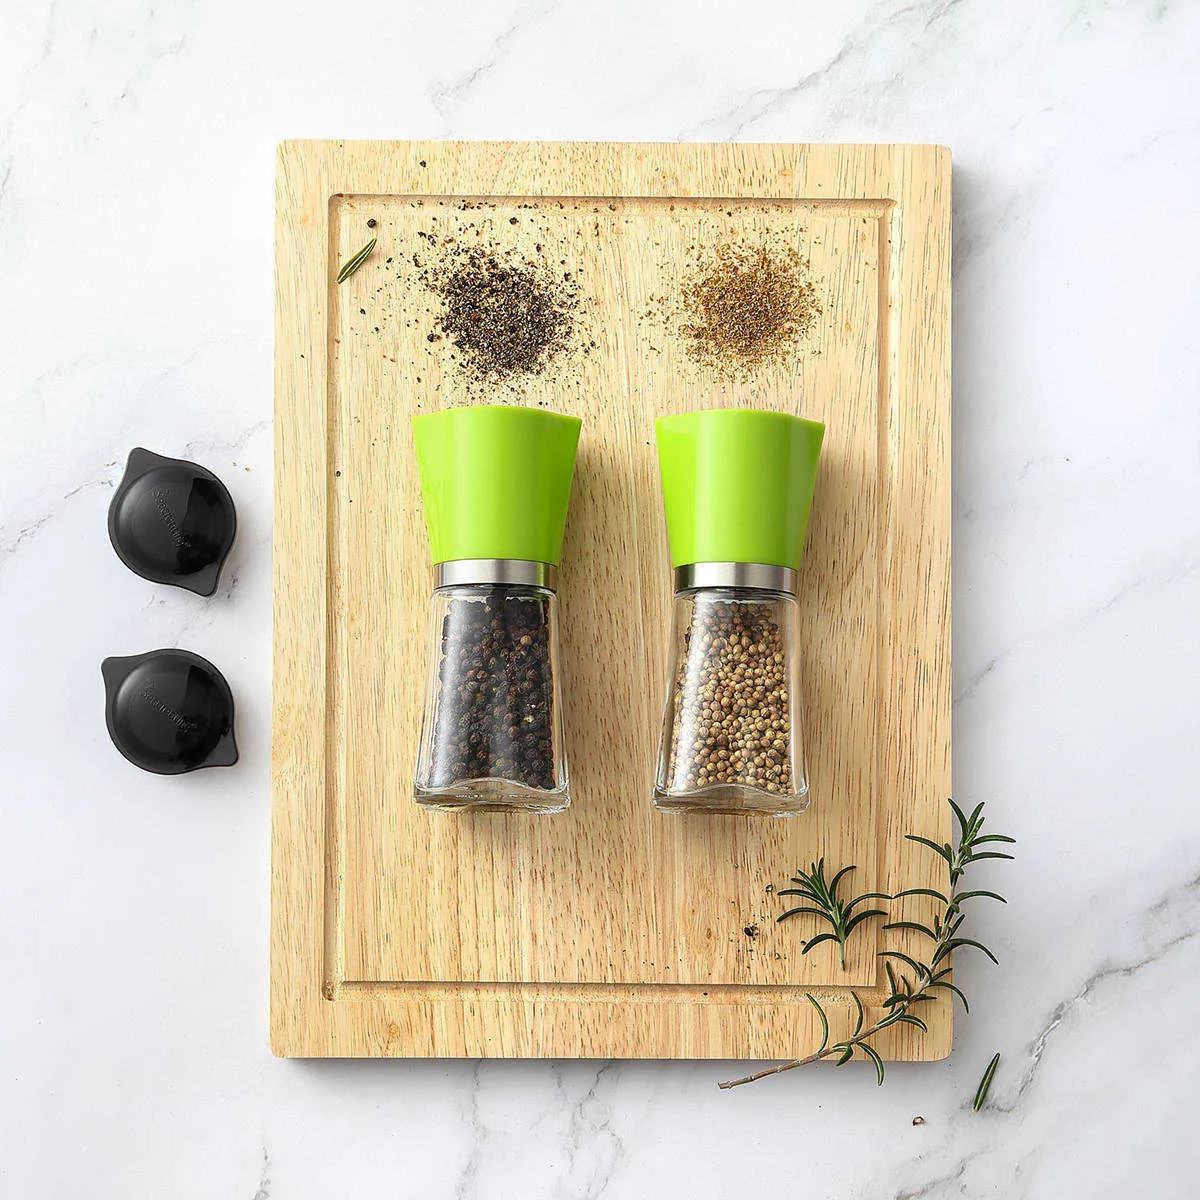 Seacreating SET 6 INCH Manual Pepper Mill Stainless Steel & Glass Salt and Grinder Kitchen Spice Tools 210611